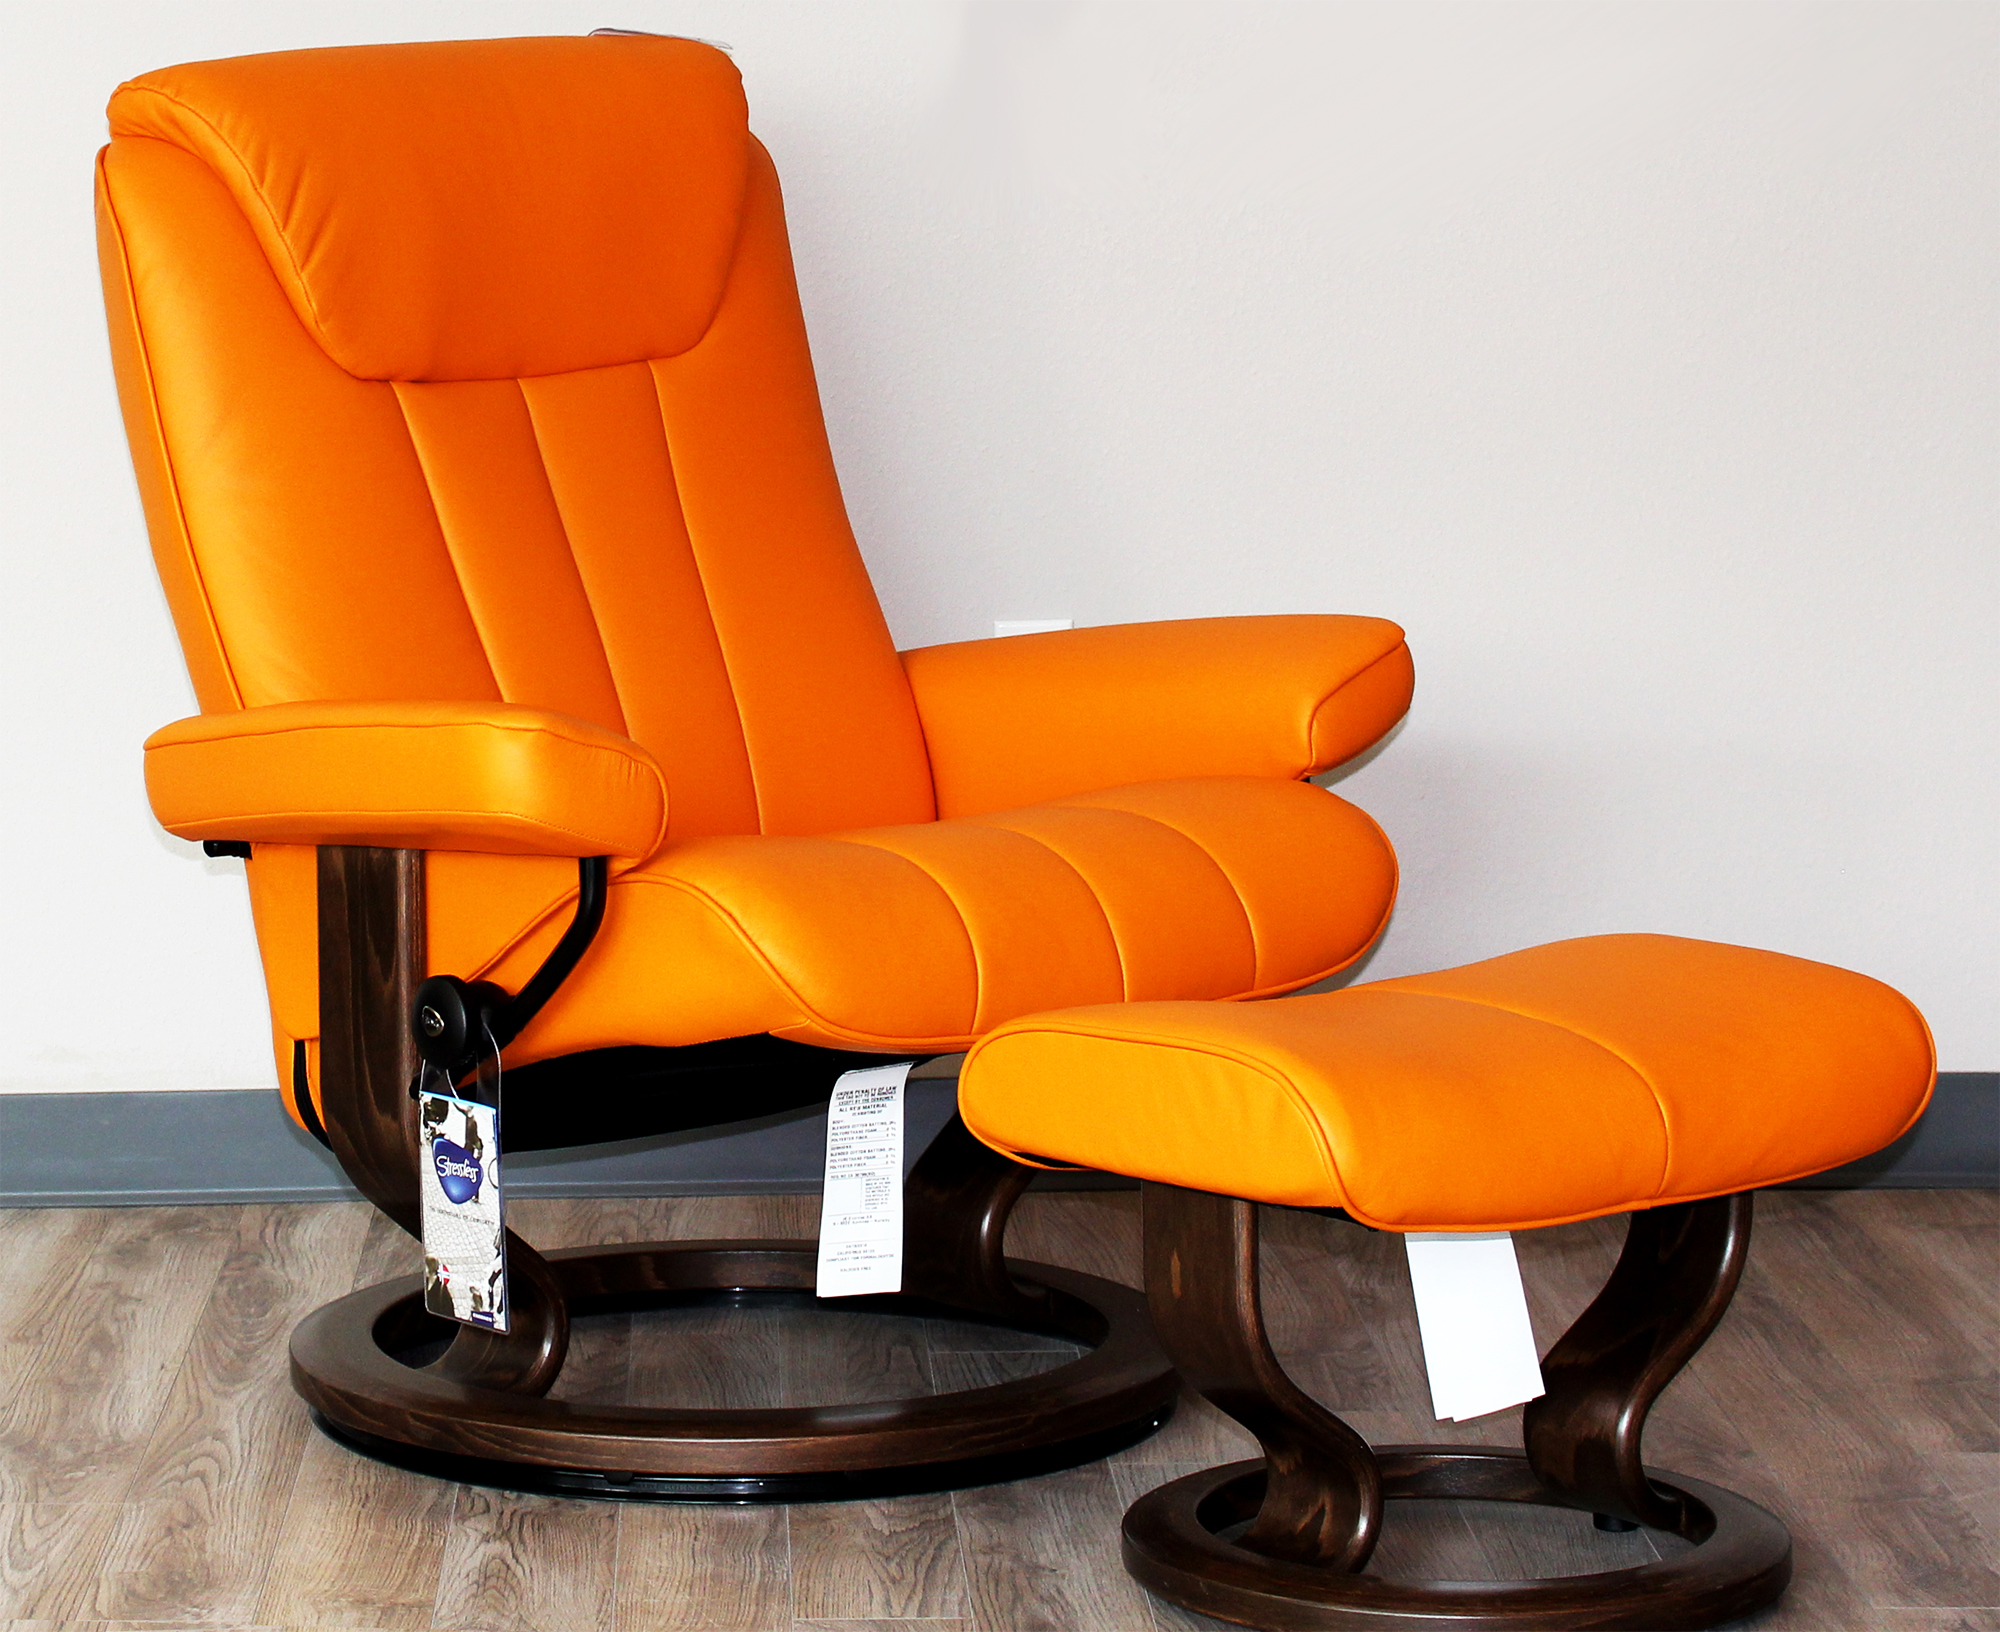 Stressless Bliss Paloma Clementine Leather Recliner Chair By Ekornes Stressless Bliss Paloma Clementine Leather Chairs Recliners